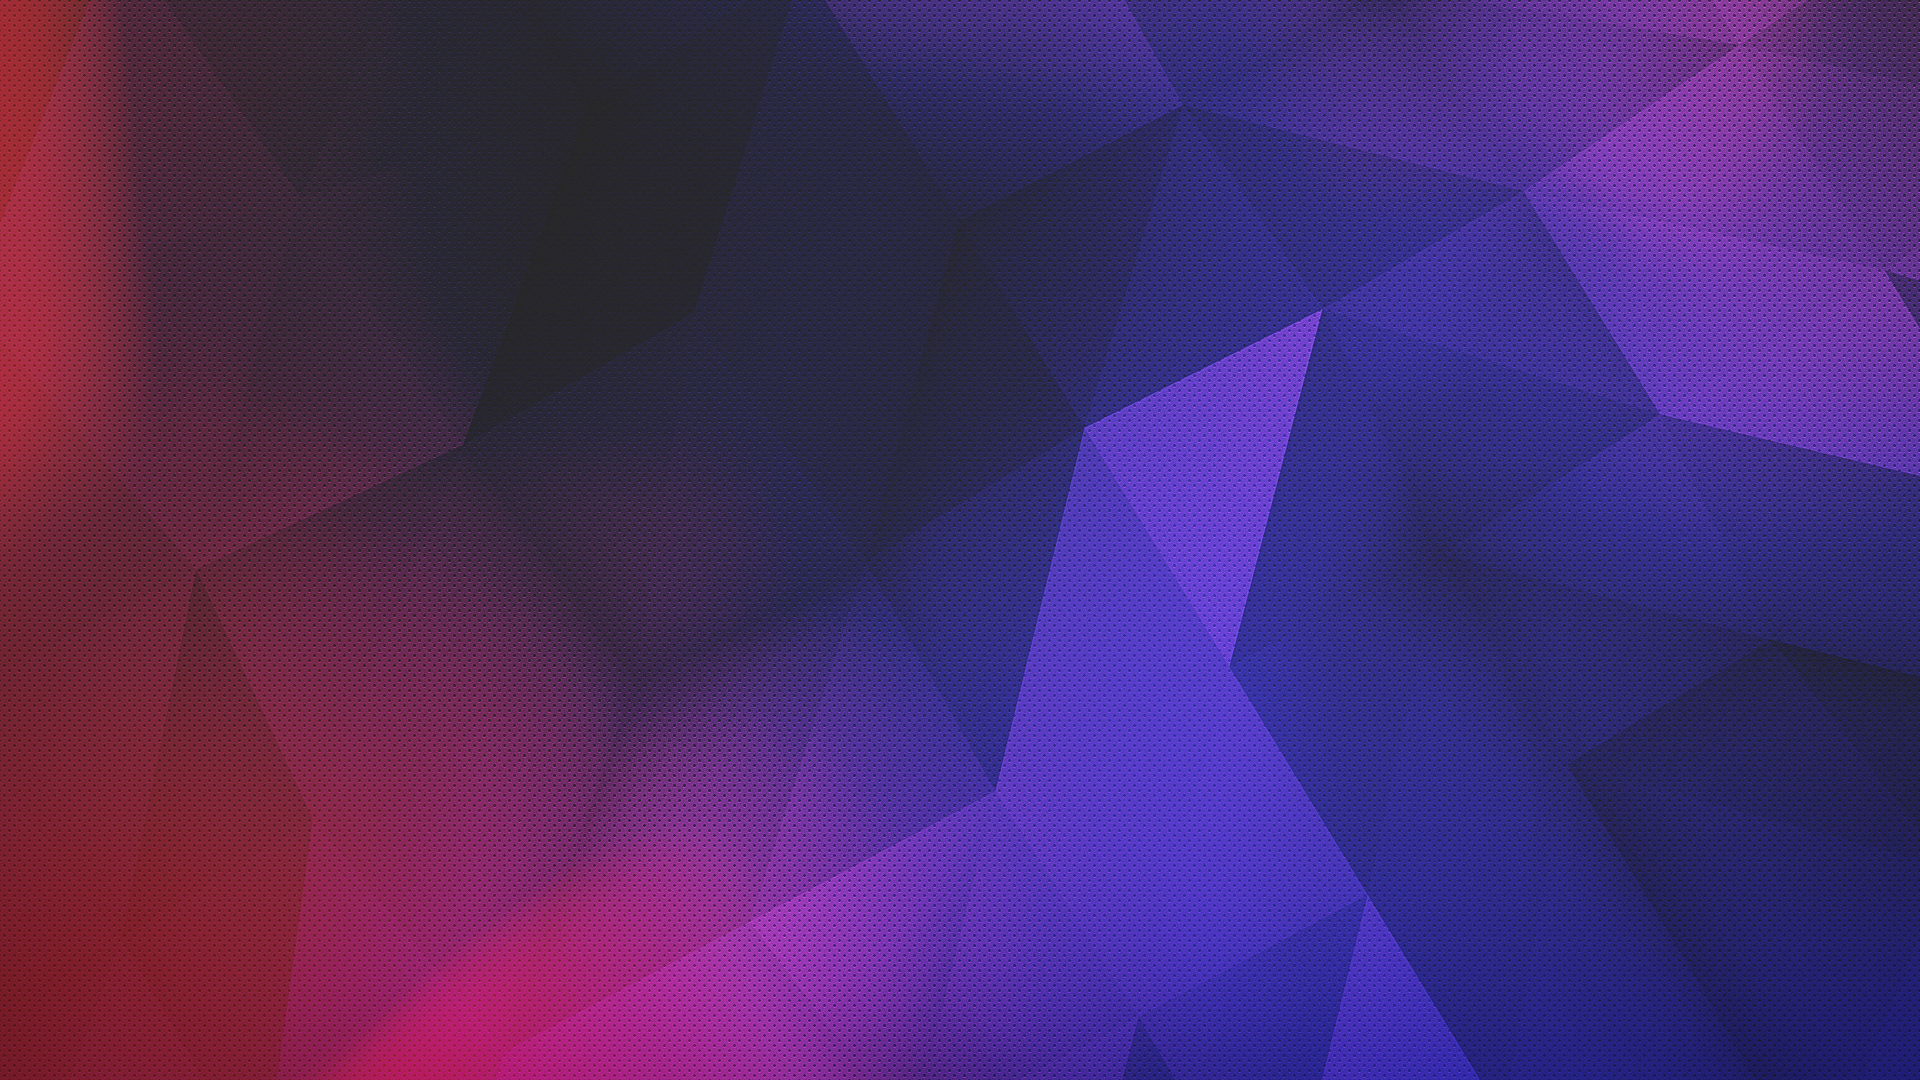 General 1920x1080 abstract red purple blue low poly digital art artwork minimalism texture violet